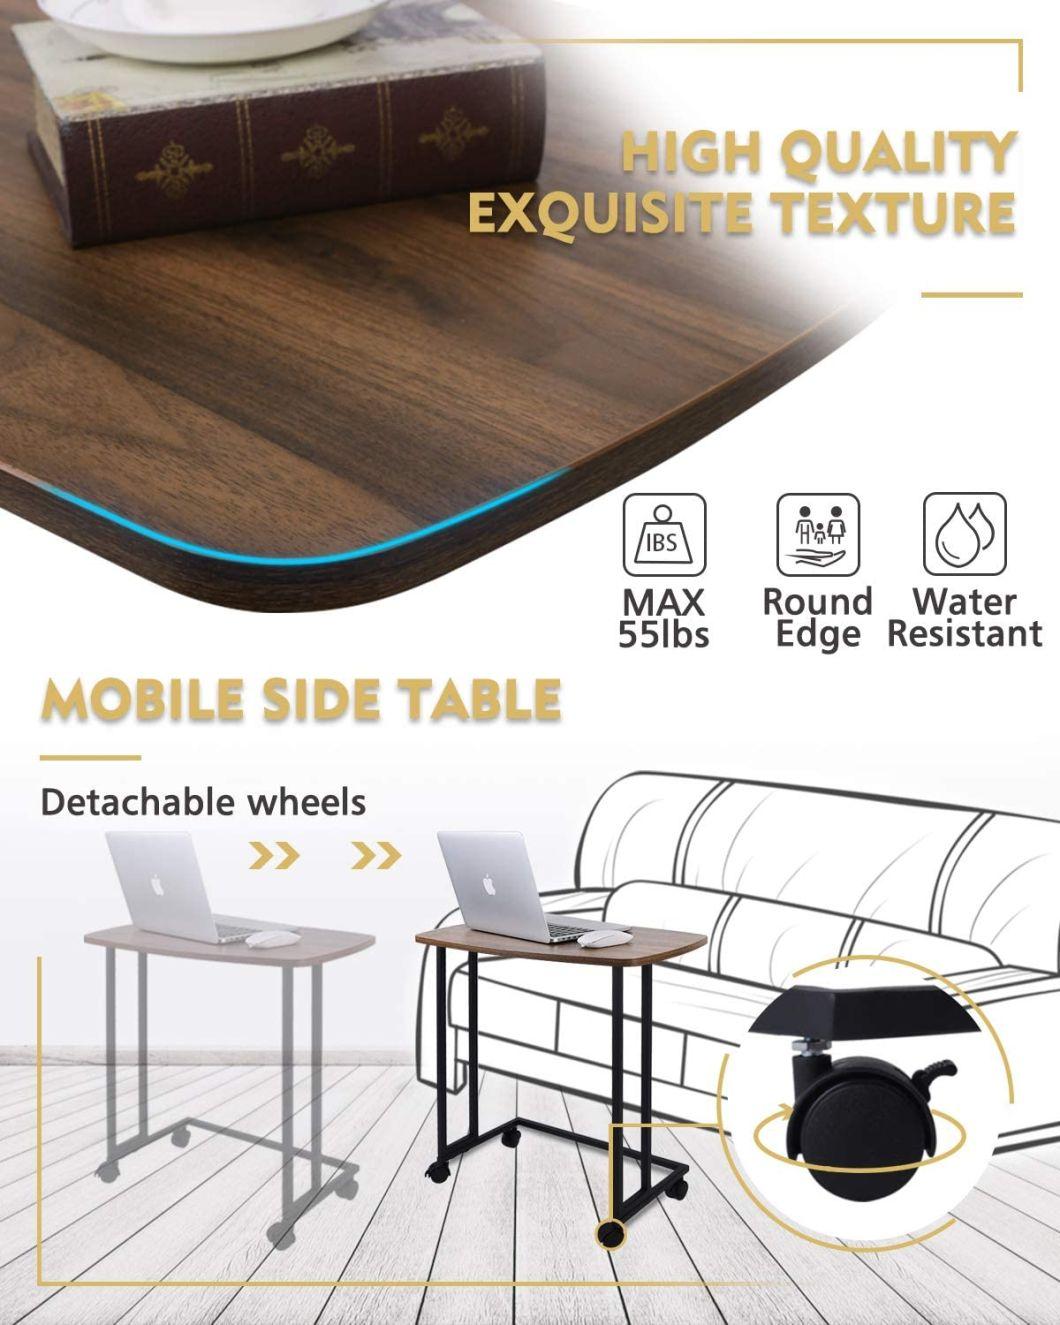 Modern Side Table, Moncot Mobile C Shaped End Table with Detachable Casters, Bed Room Laptop Bed Tray Table Portable